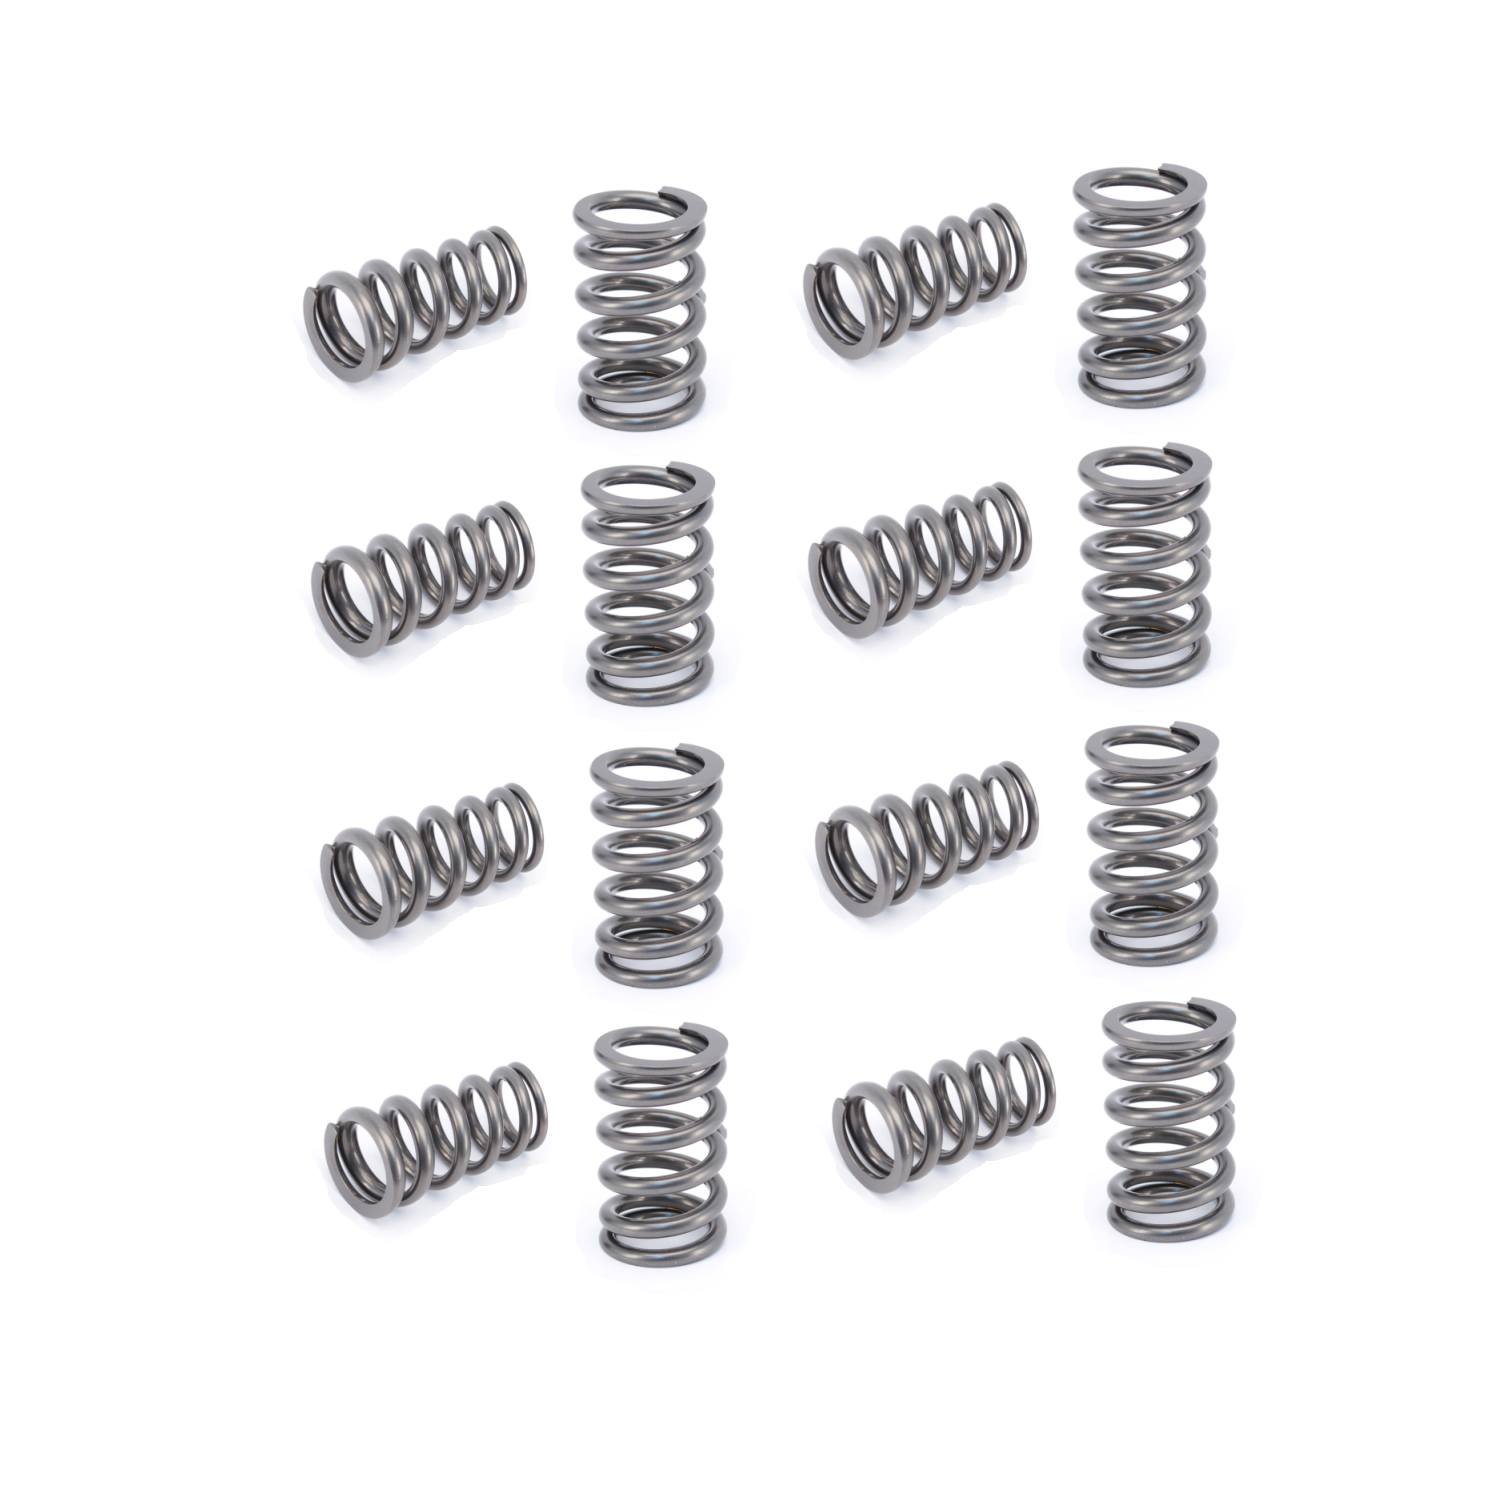 Single Outer Valve Springs Rate: 356 lbs